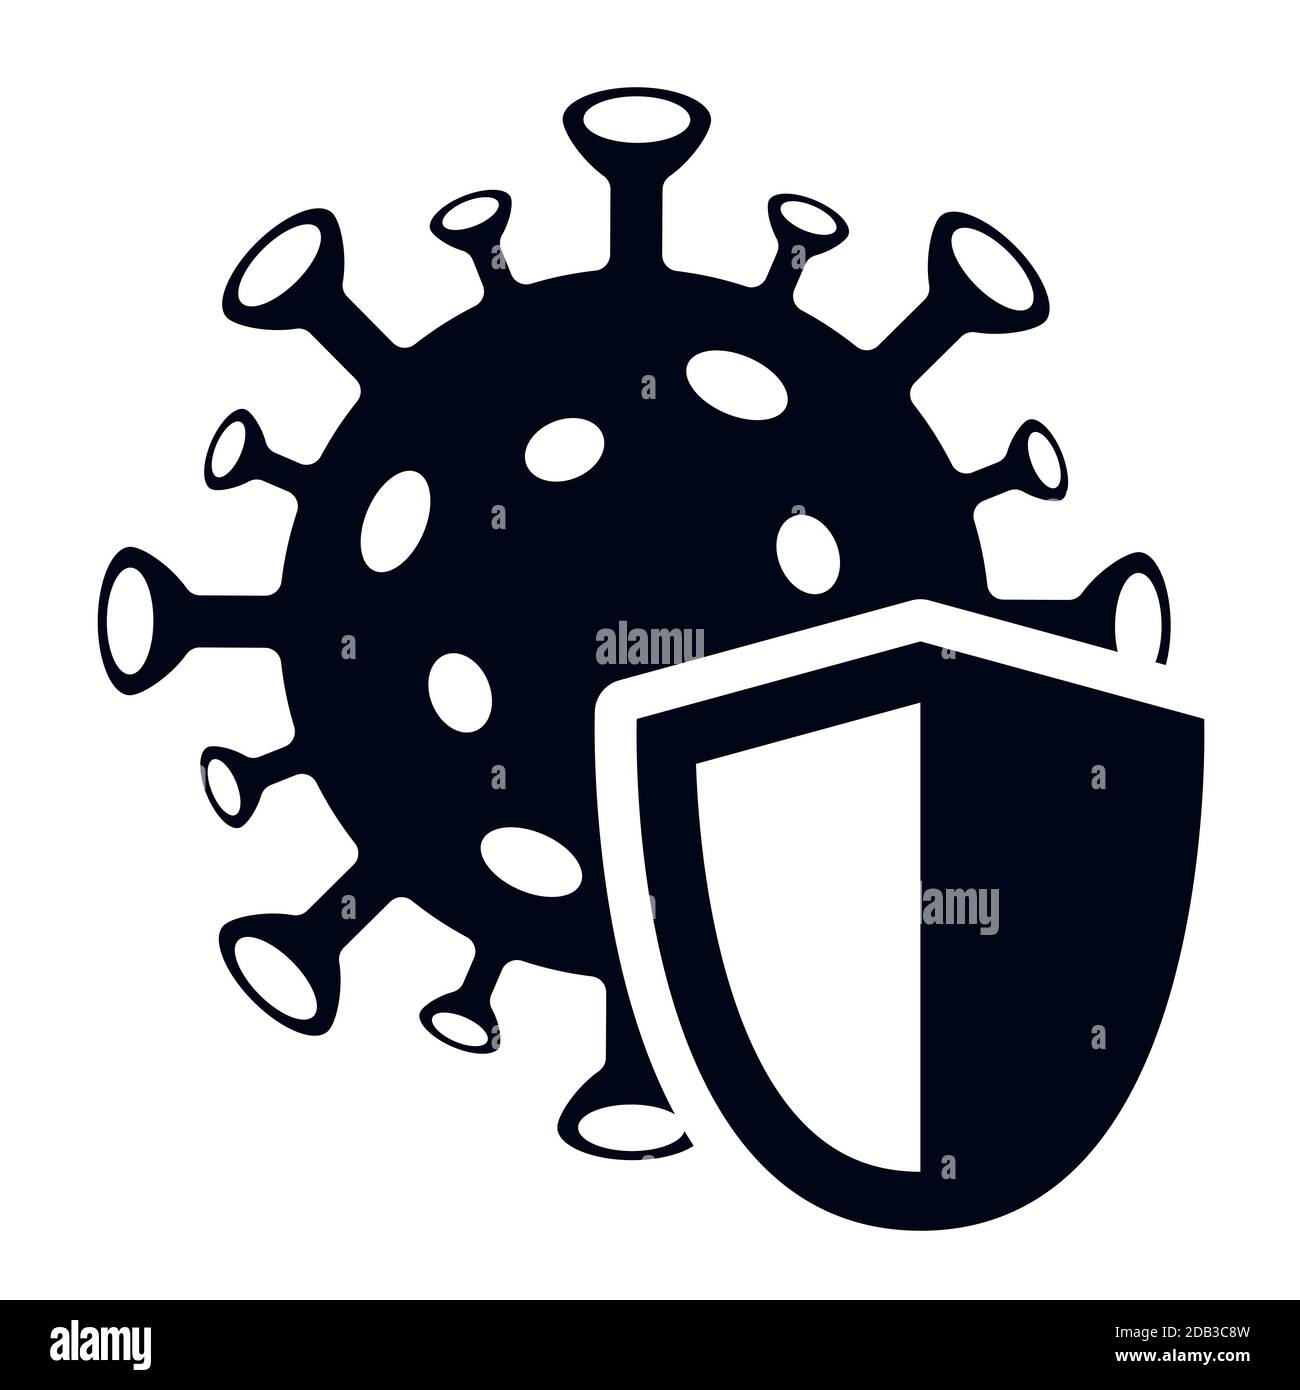 Corona virus with protection shield vector illustration icon or symbol for protection and resistance Stock Vector